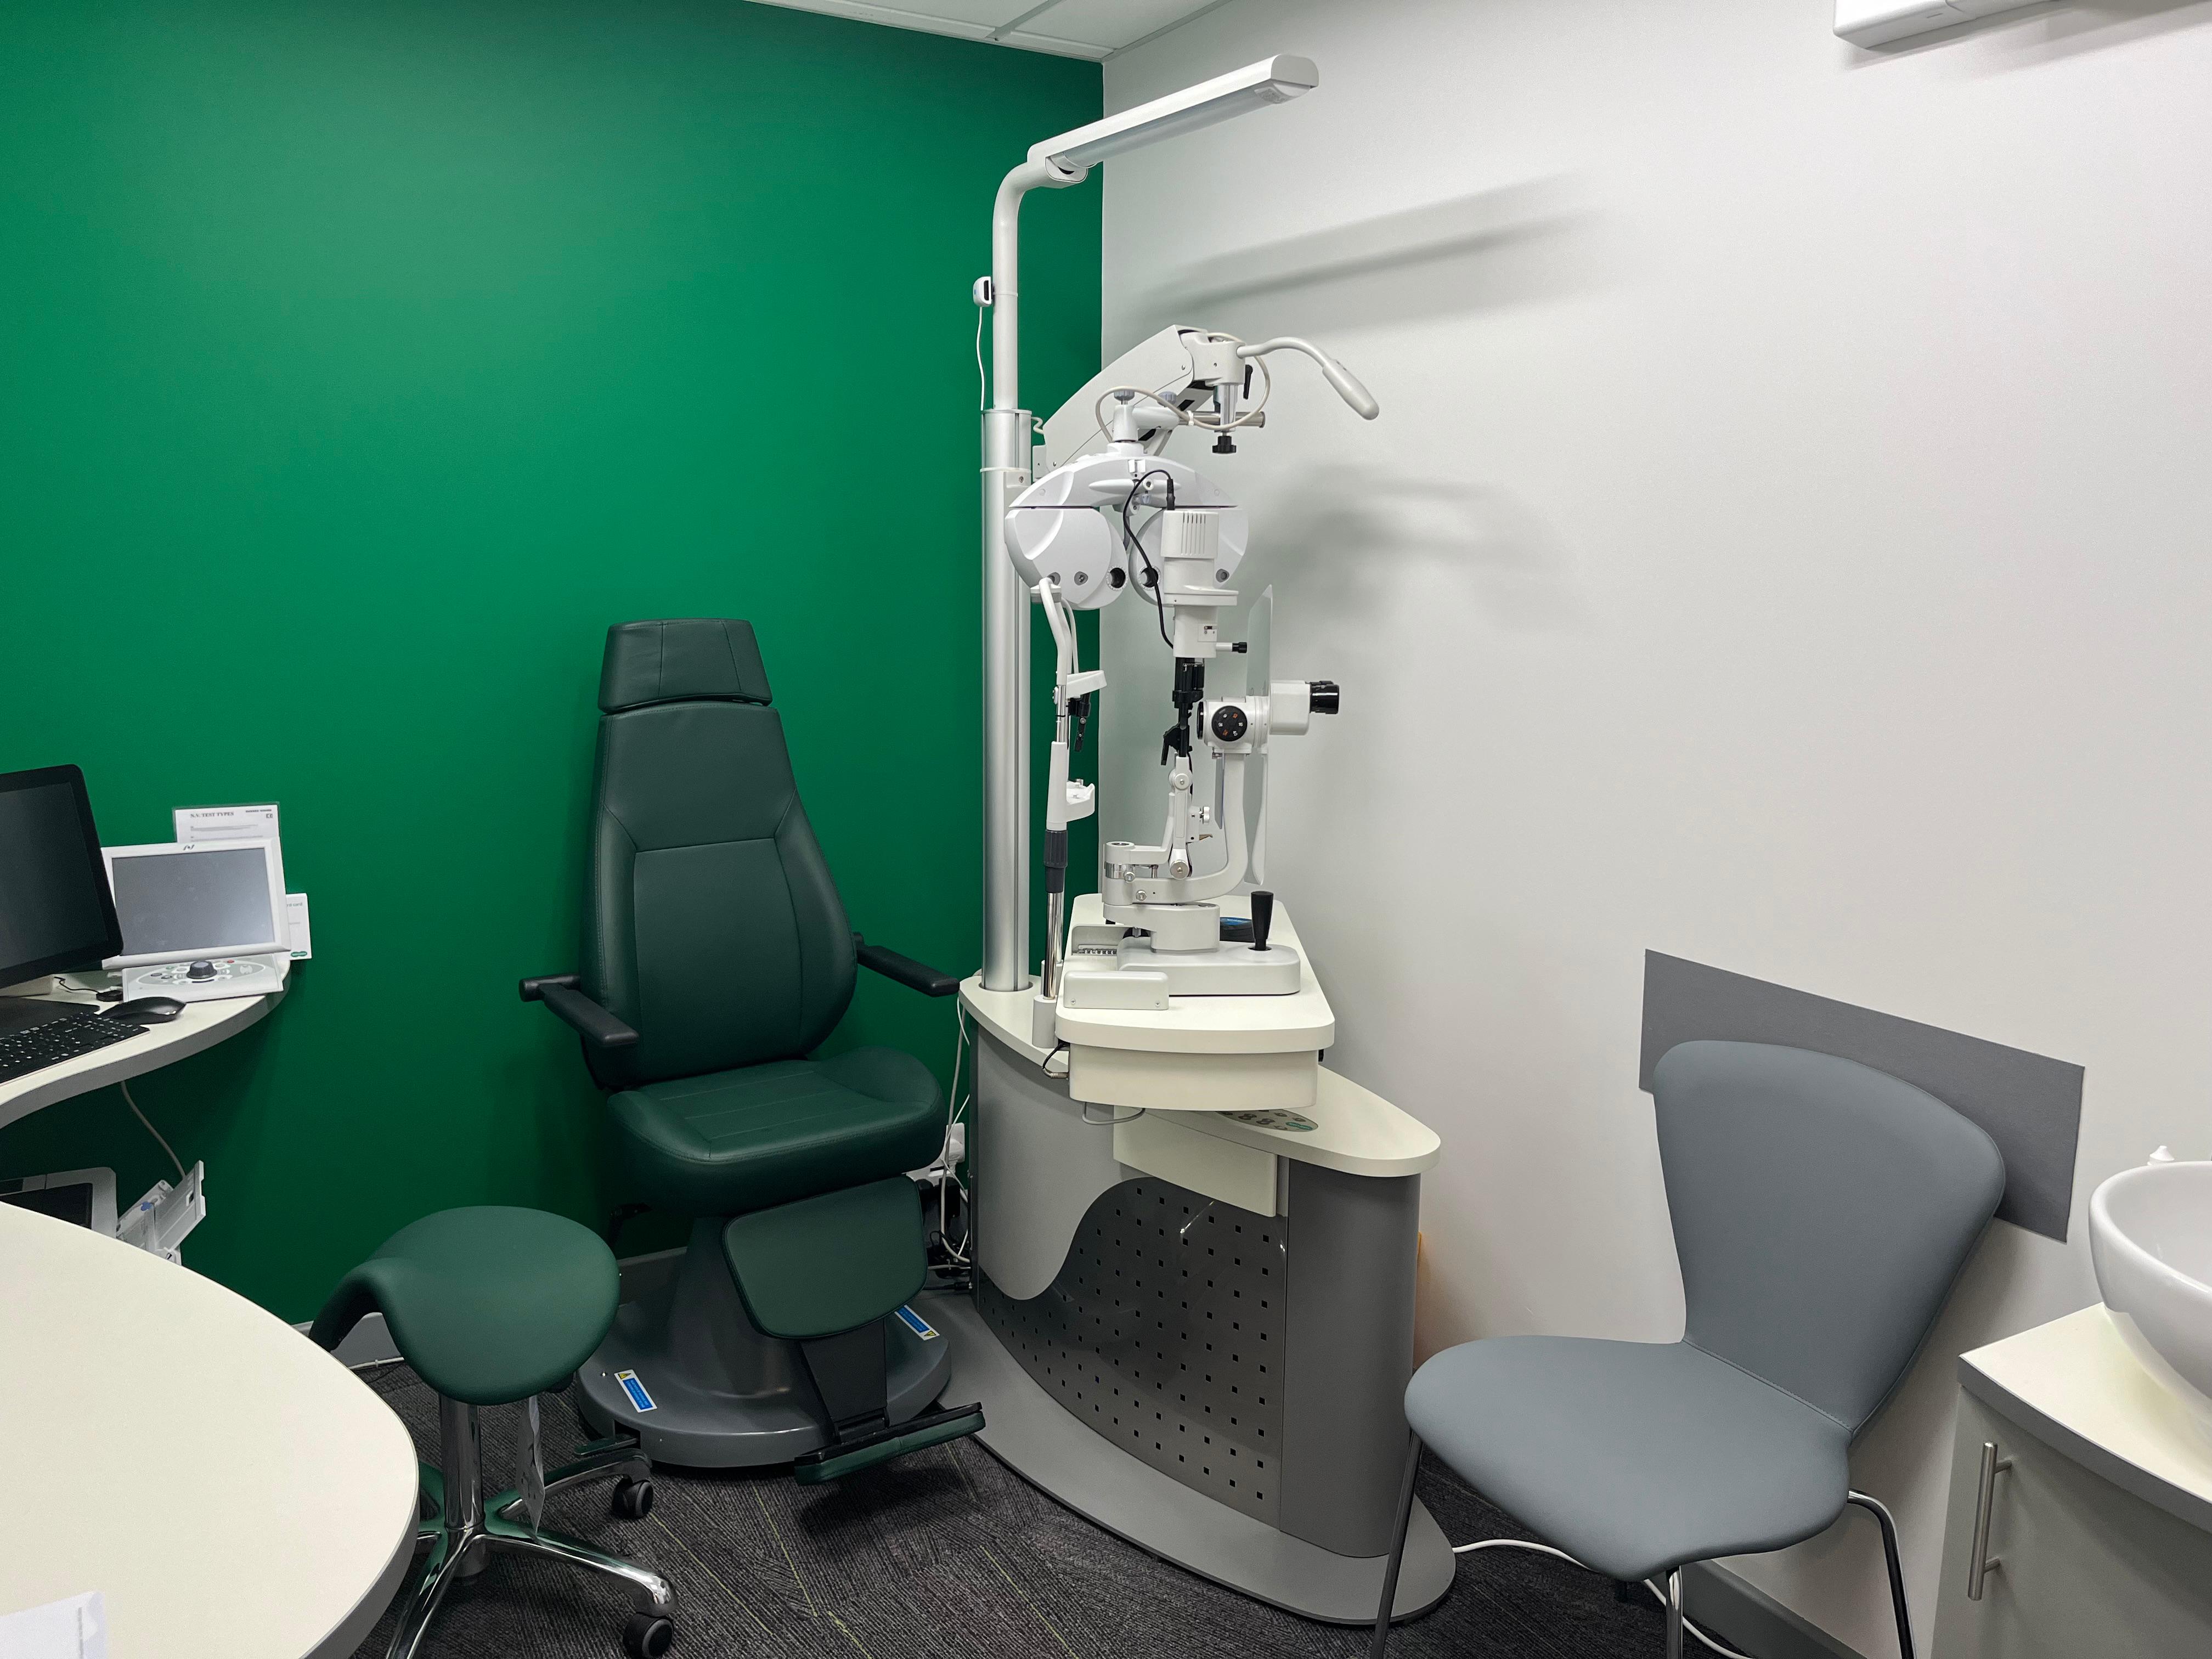 Images Specsavers Opticians and Audiologists - Jarrow